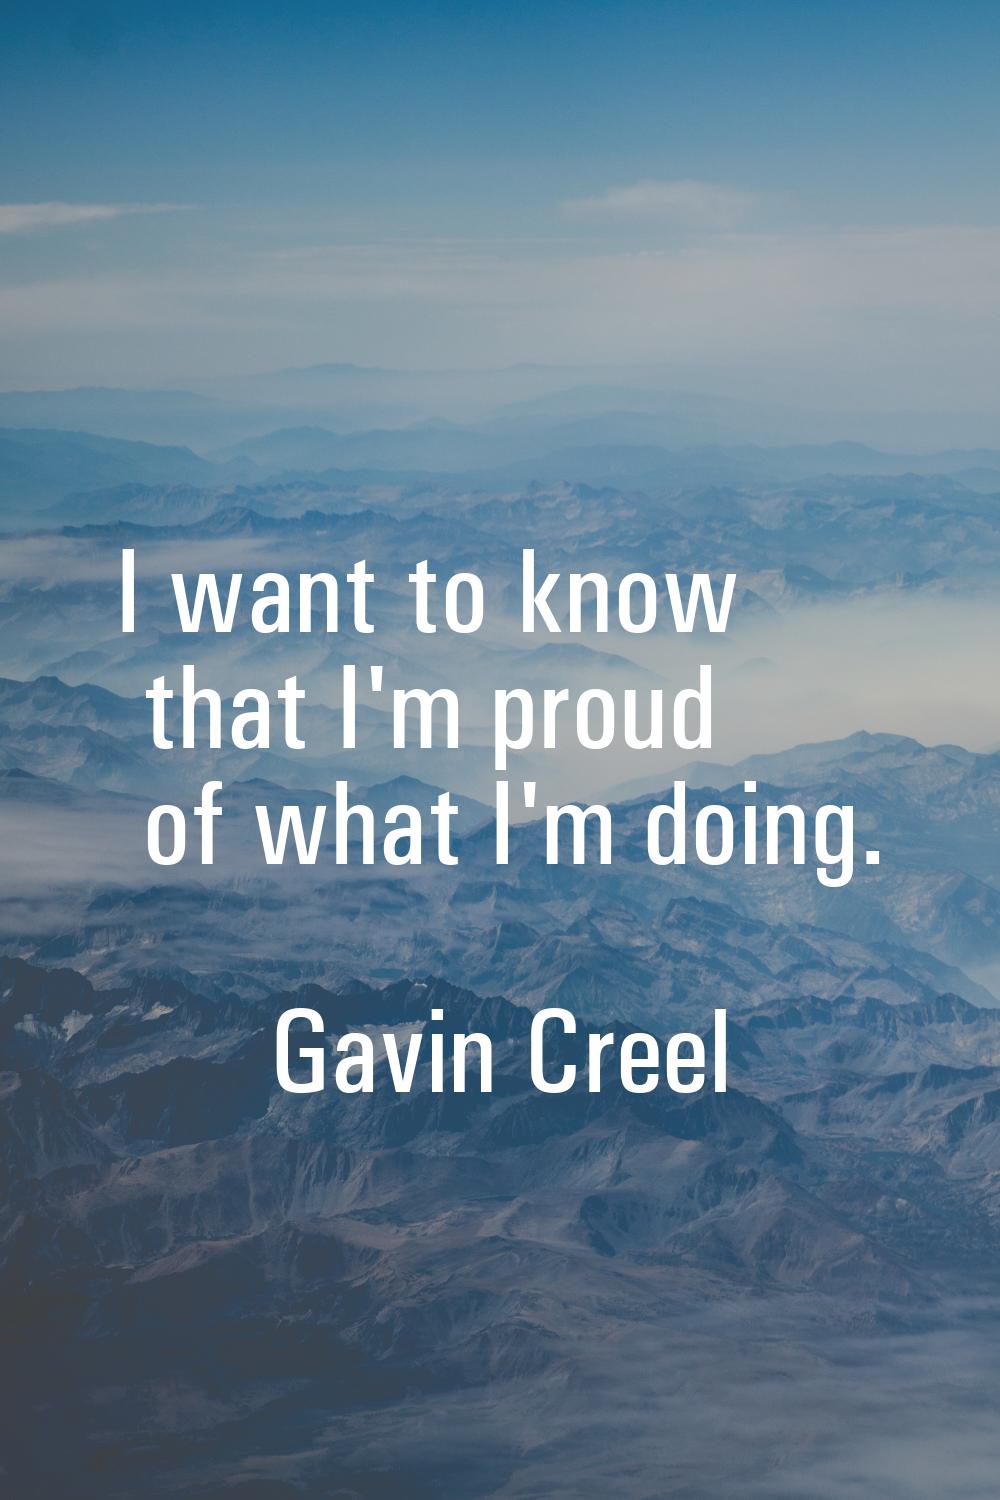 I want to know that I'm proud of what I'm doing.